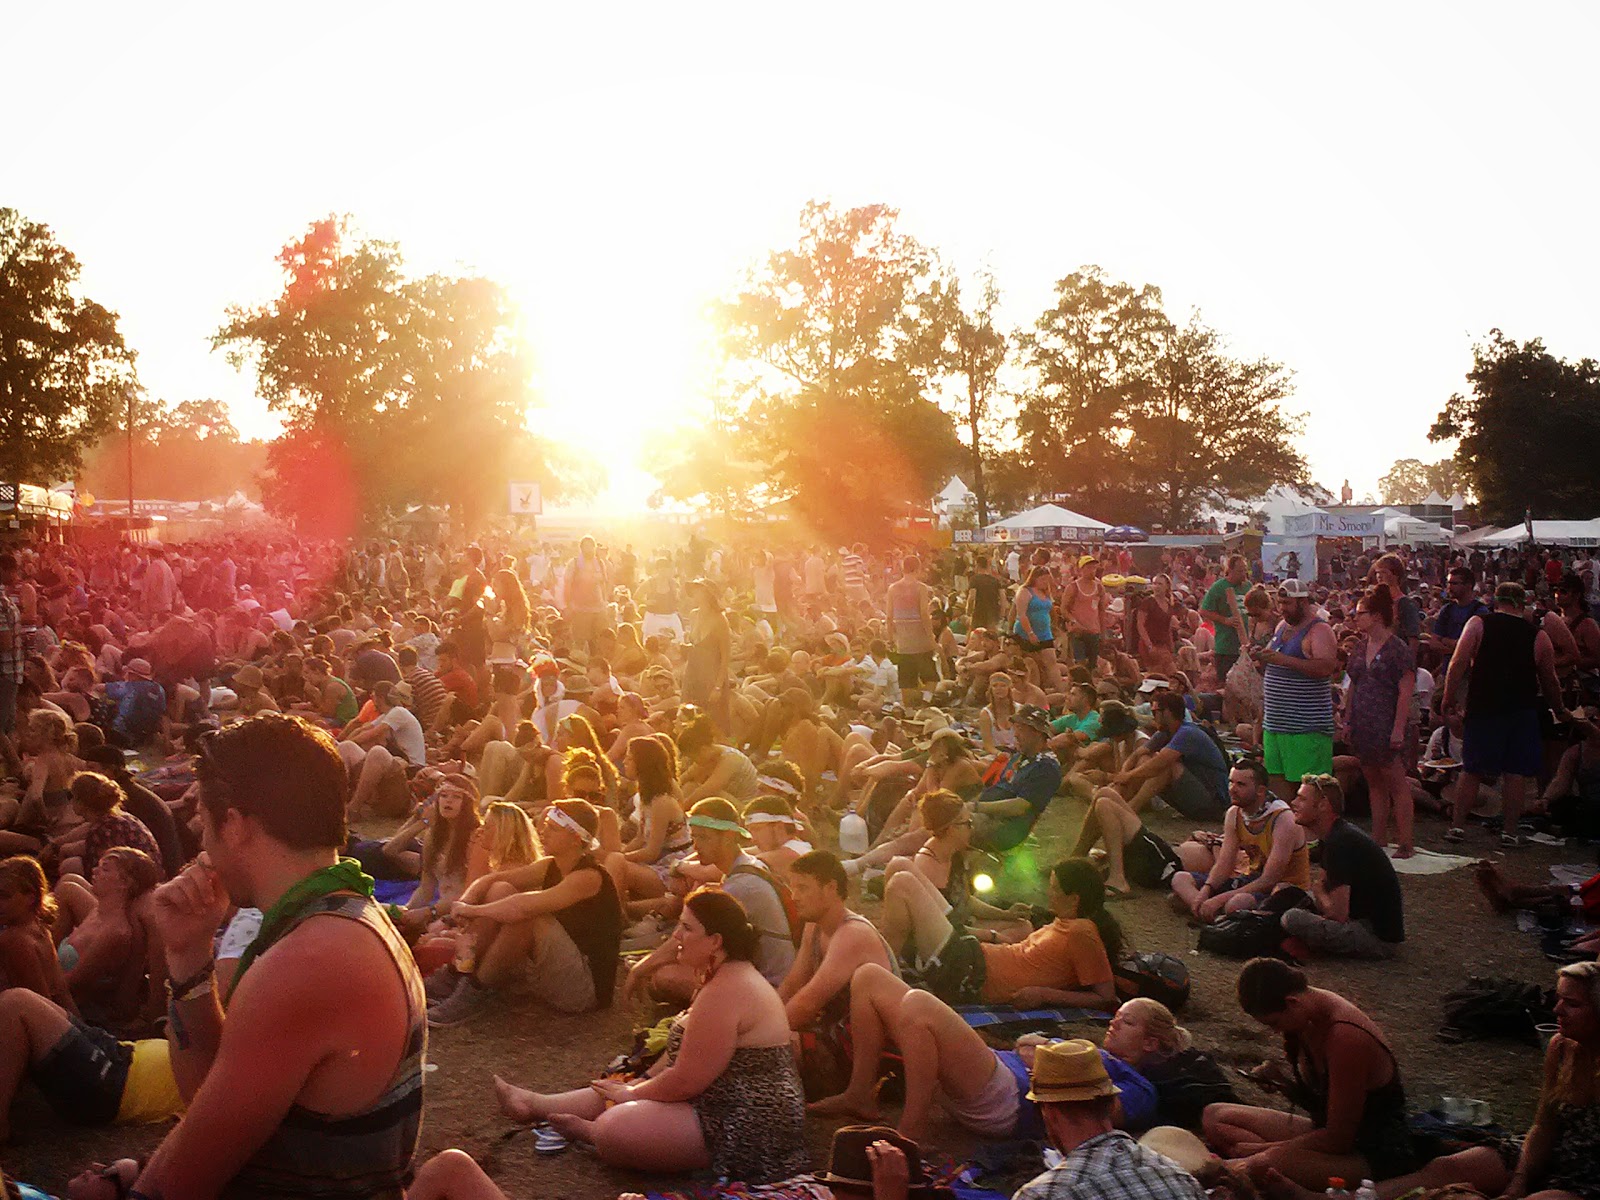 The crowd at The What Stage on Sunday, June 15 at the Bonnaroo Music & Arts Festival